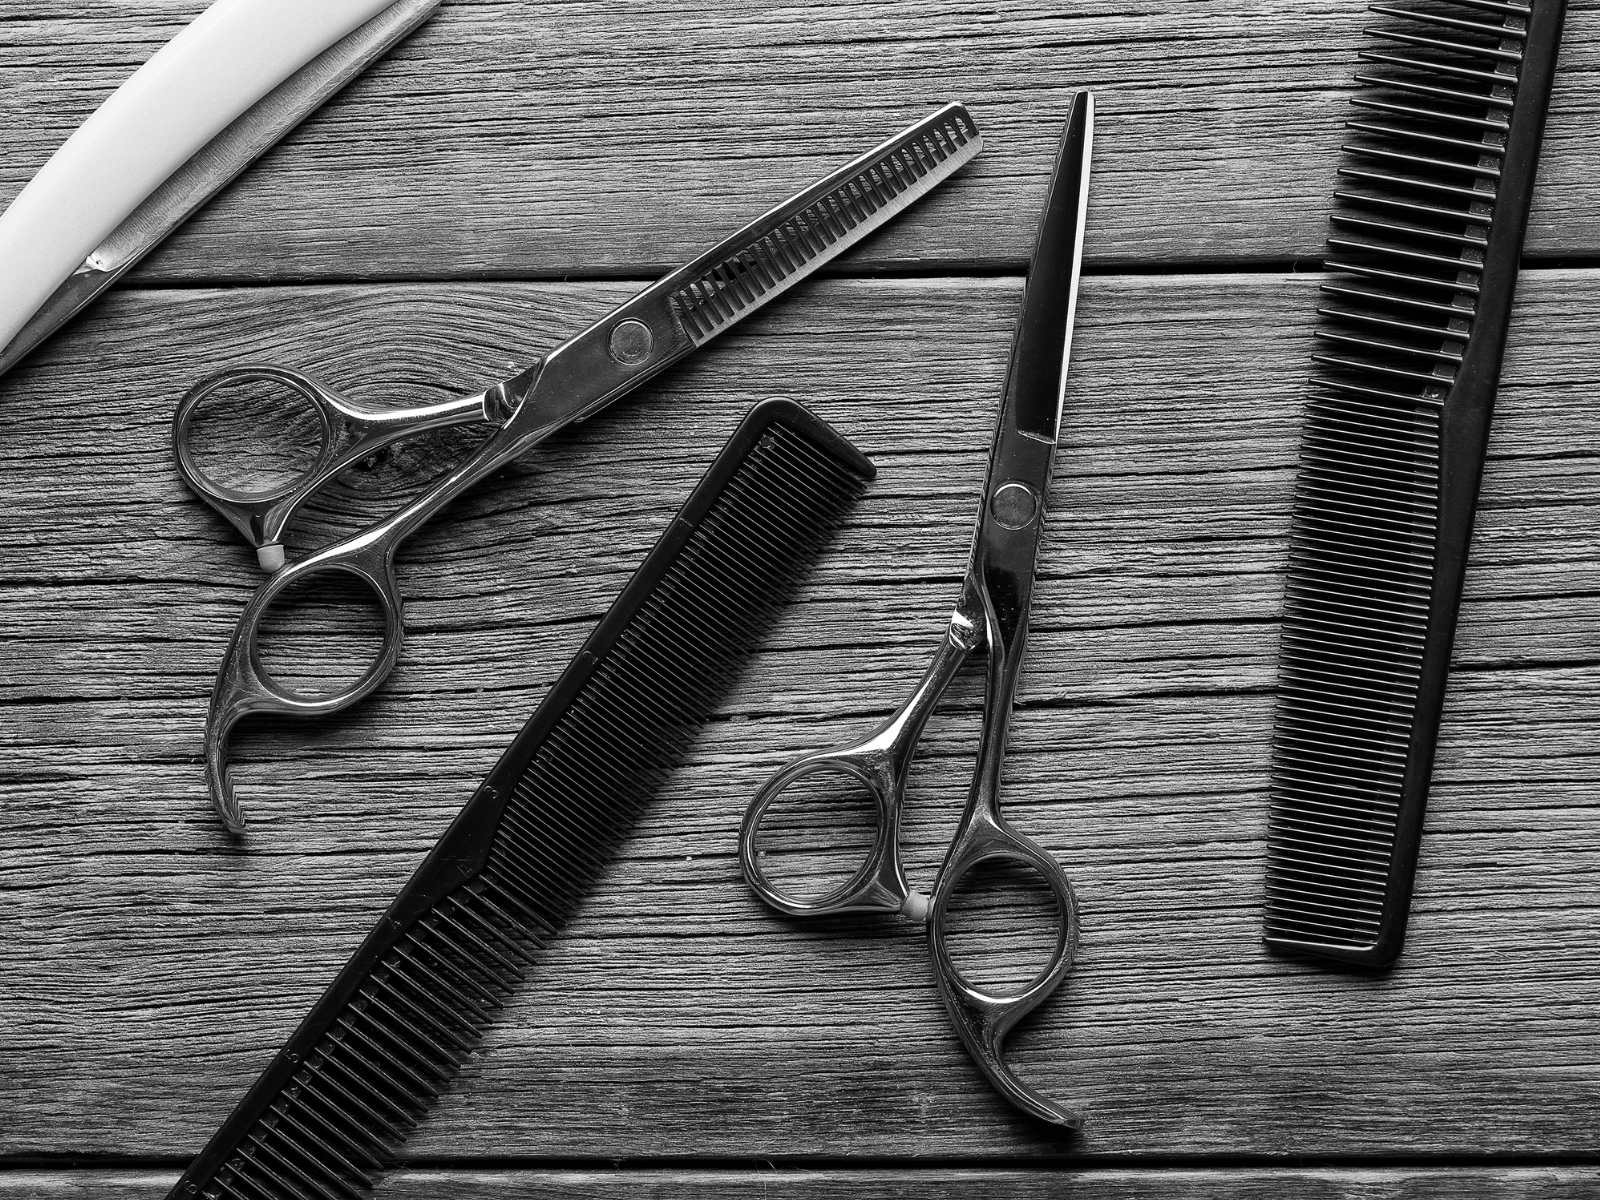 Barber hair cutting scissors and combs